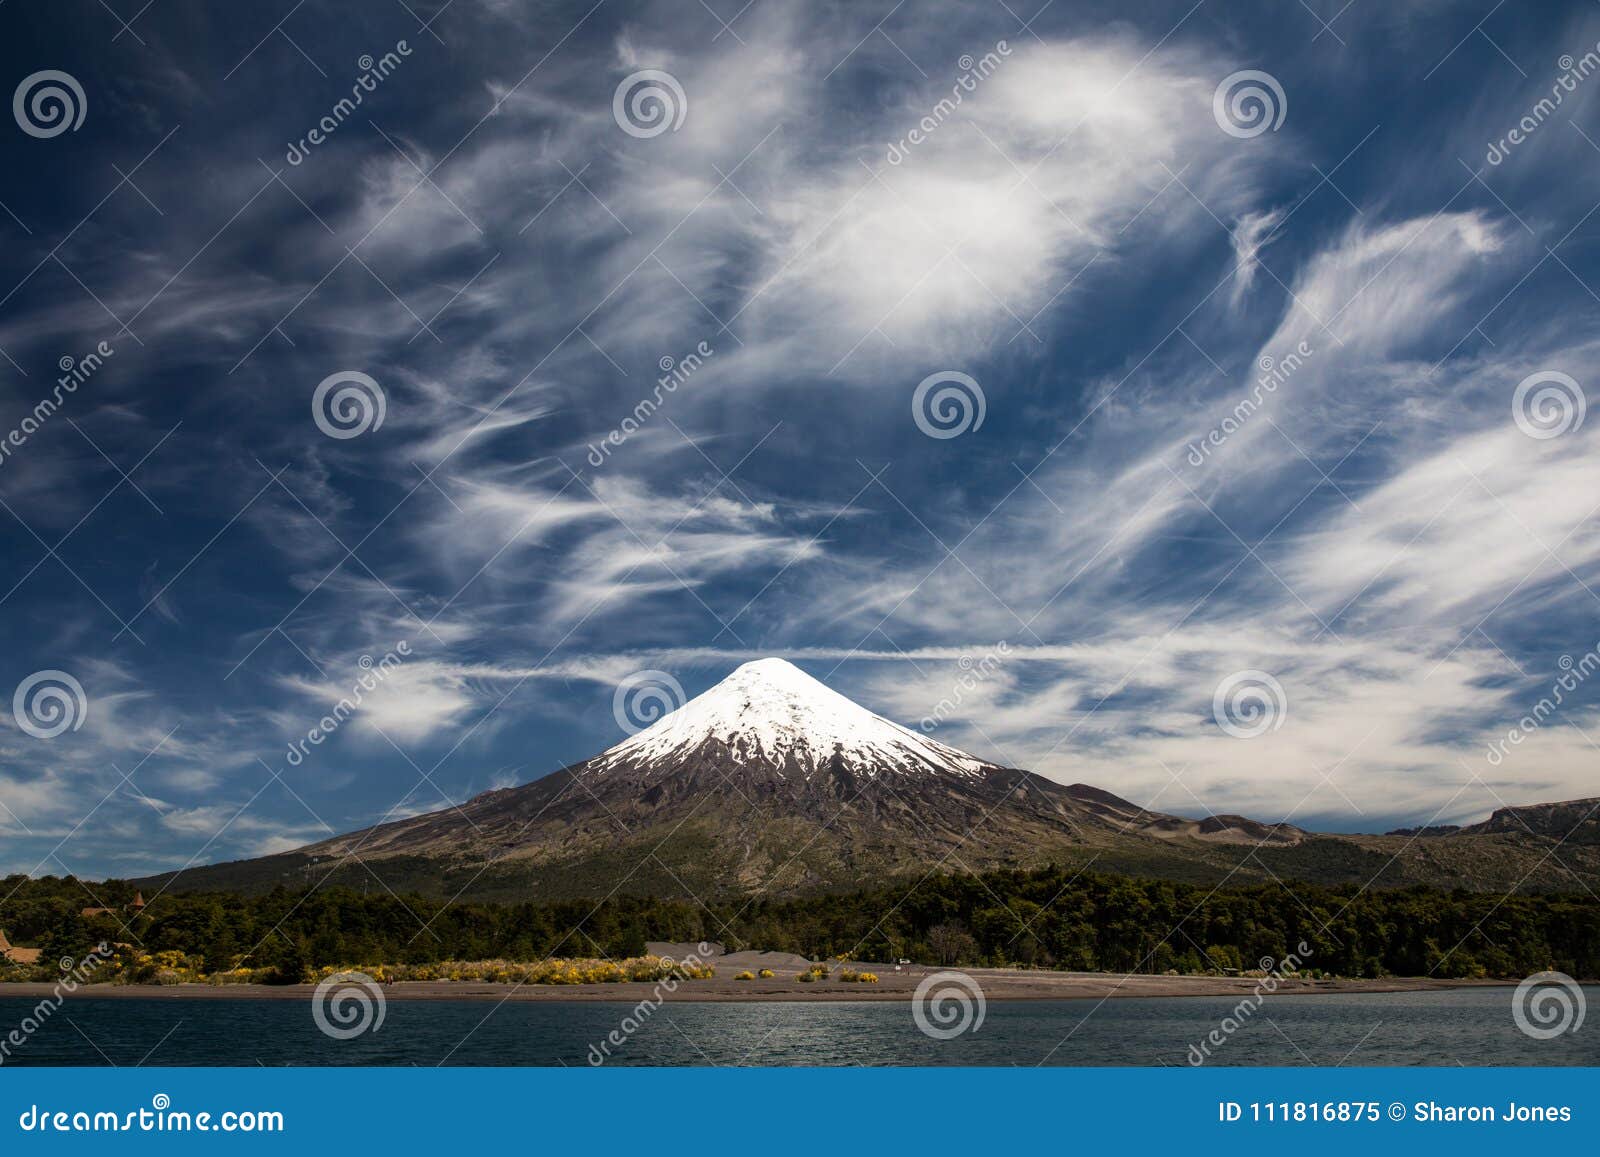 osorno volcano, a conical stratovolcano with dramatic cloudy blue sky in los lagos region, patagonia, chile